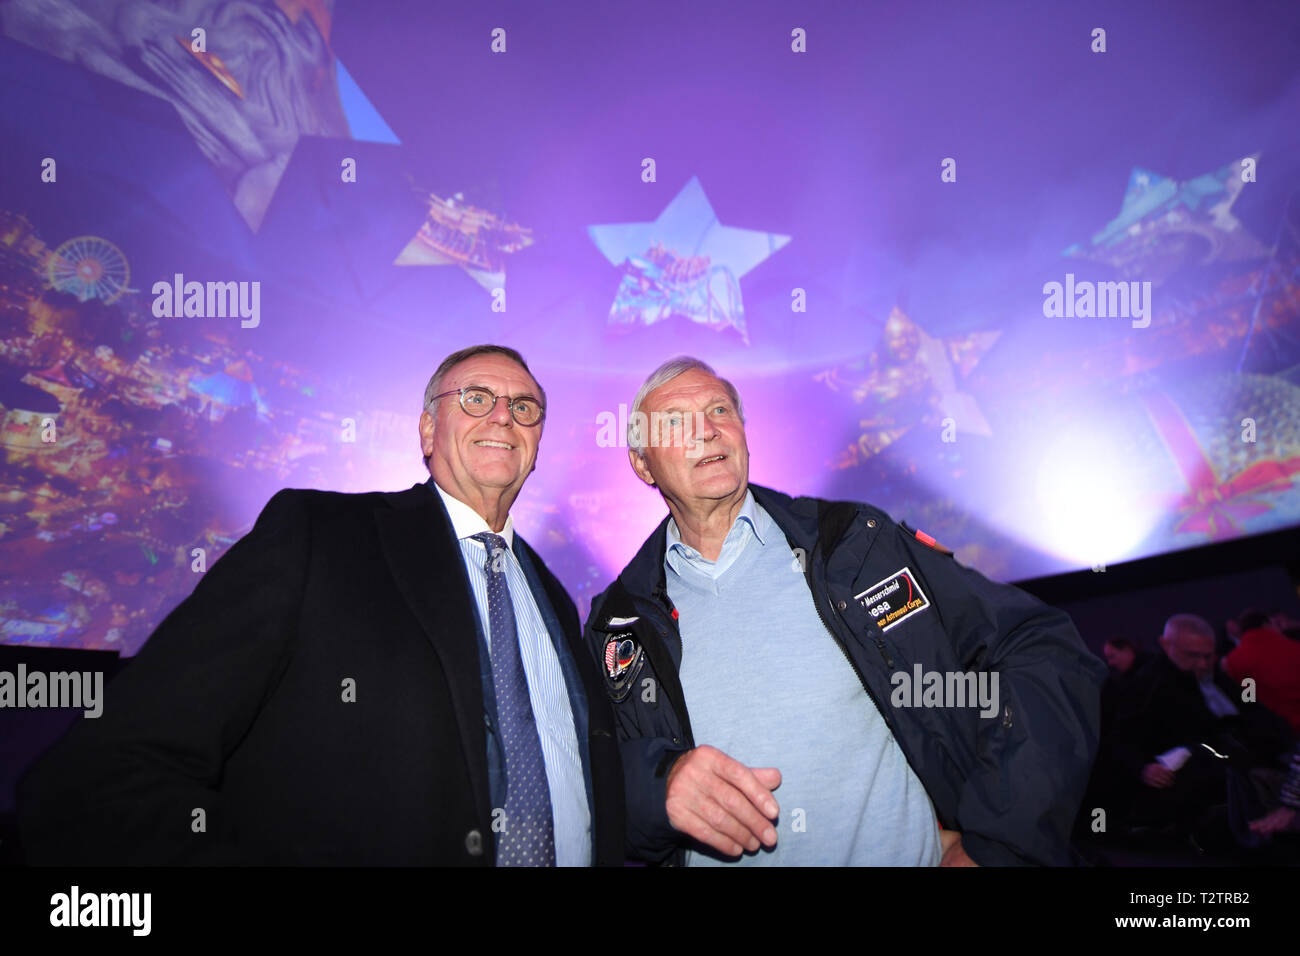 Rust, Germany. 04th Apr, 2018. Roland Mack (l), Managing Director of Europa-Park, and astronaut Ernst Messerschmid (r) stand in the Dreamtime Dome and watch the film 'Mission Astronaut'. In the 360 degree dome the astronaut film is shown. Europa-Park is Germany's largest amusement park. Credit: Patrick Seeger/dpa/Alamy Live News Stock Photo